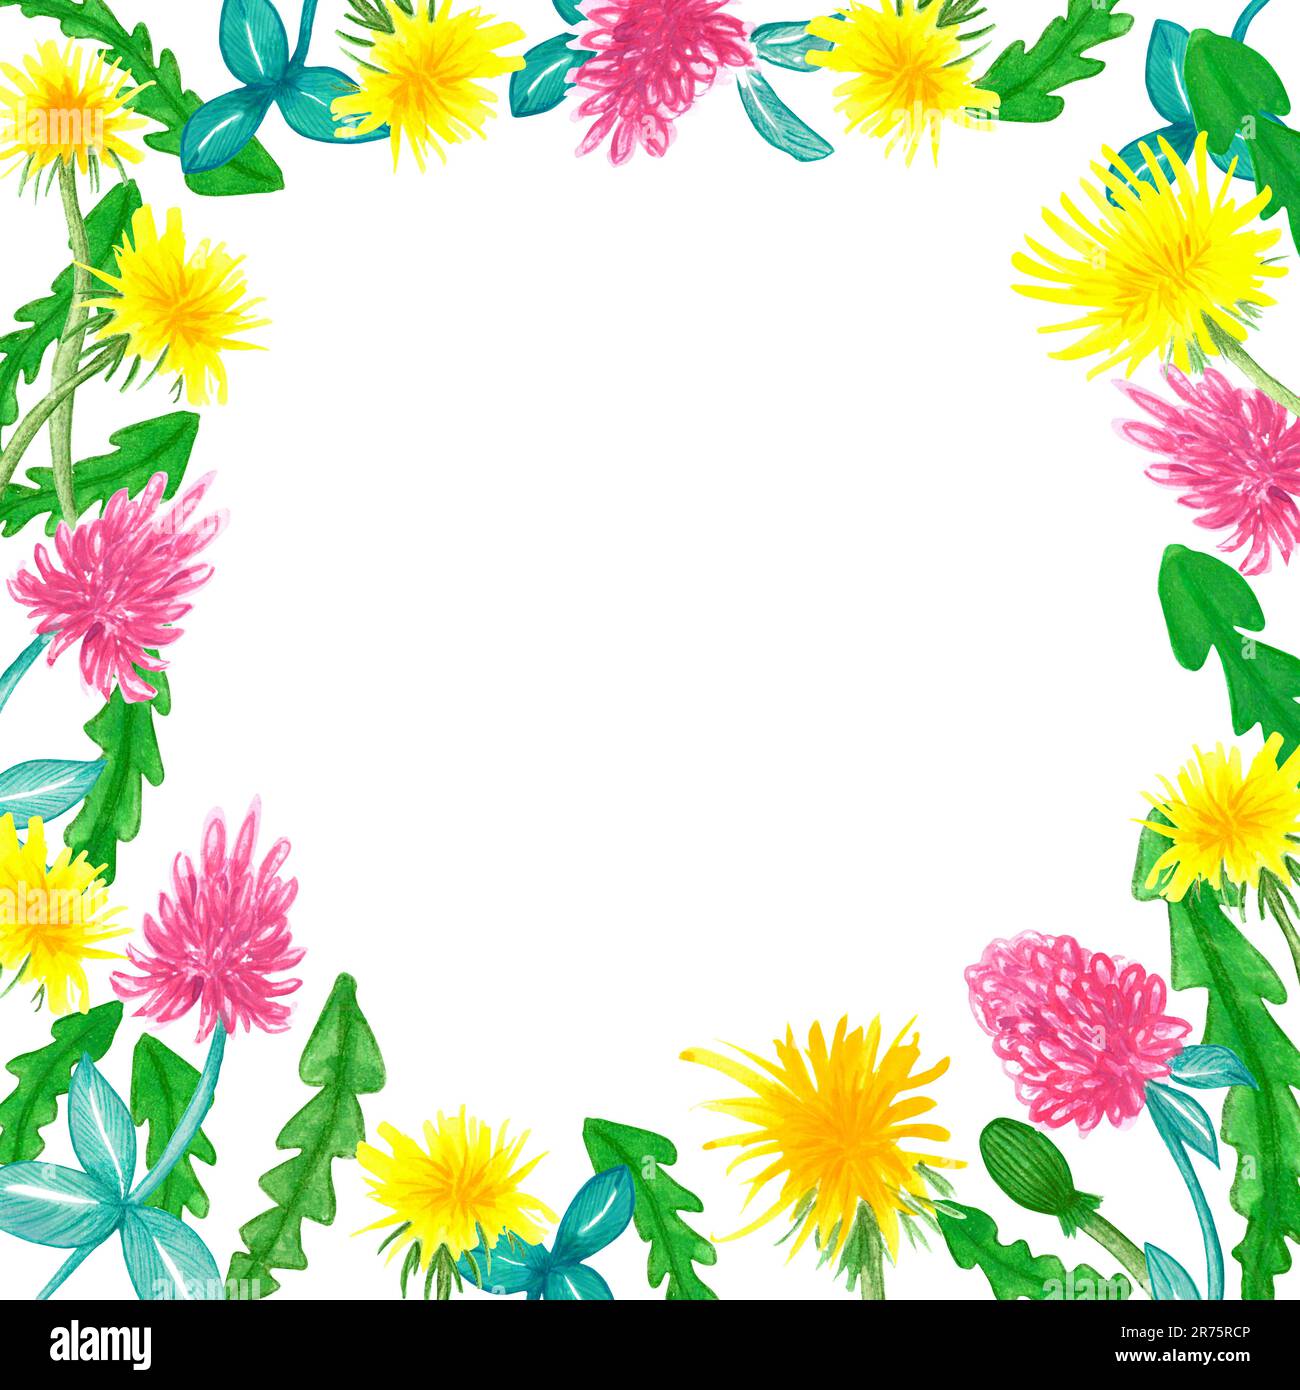 https://c8.alamy.com/comp/2R75RCP/yellow-dandelion-and-clover-flowers-hand-drawn-floral-frame-on-white-background-2R75RCP.jpg